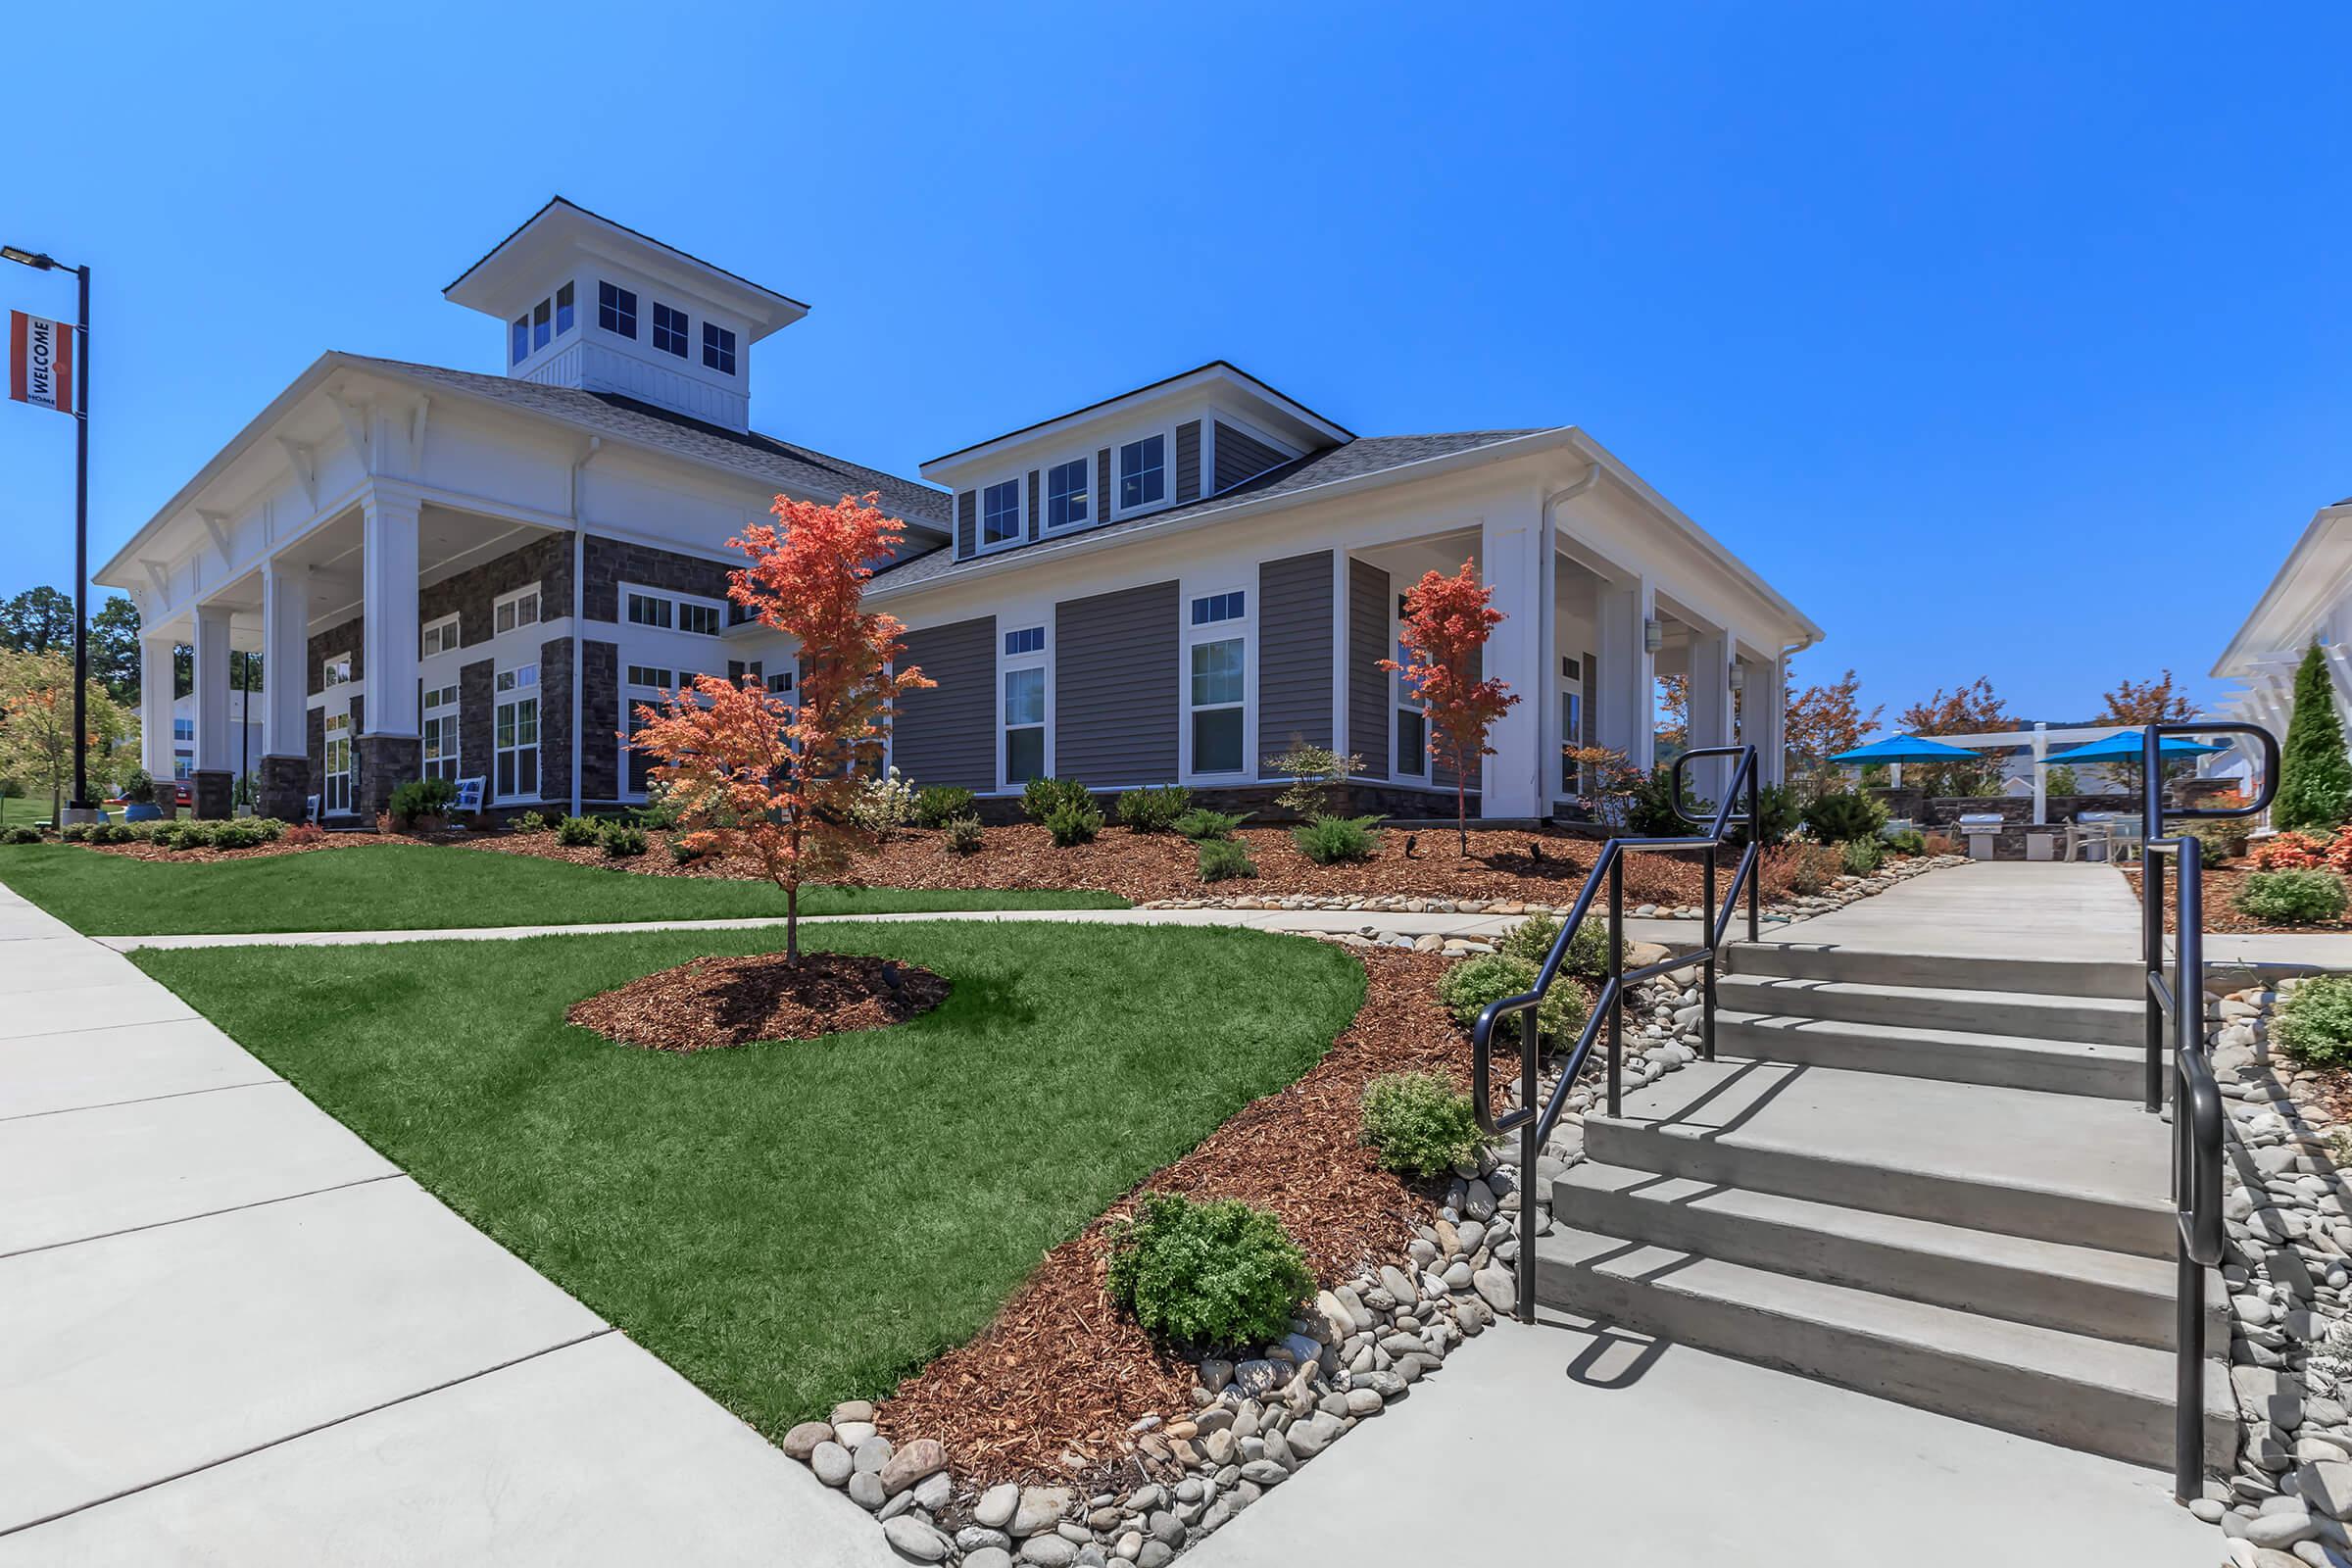 Welcome to the Riverstone Apartments at Long Shoals In Arden, NC